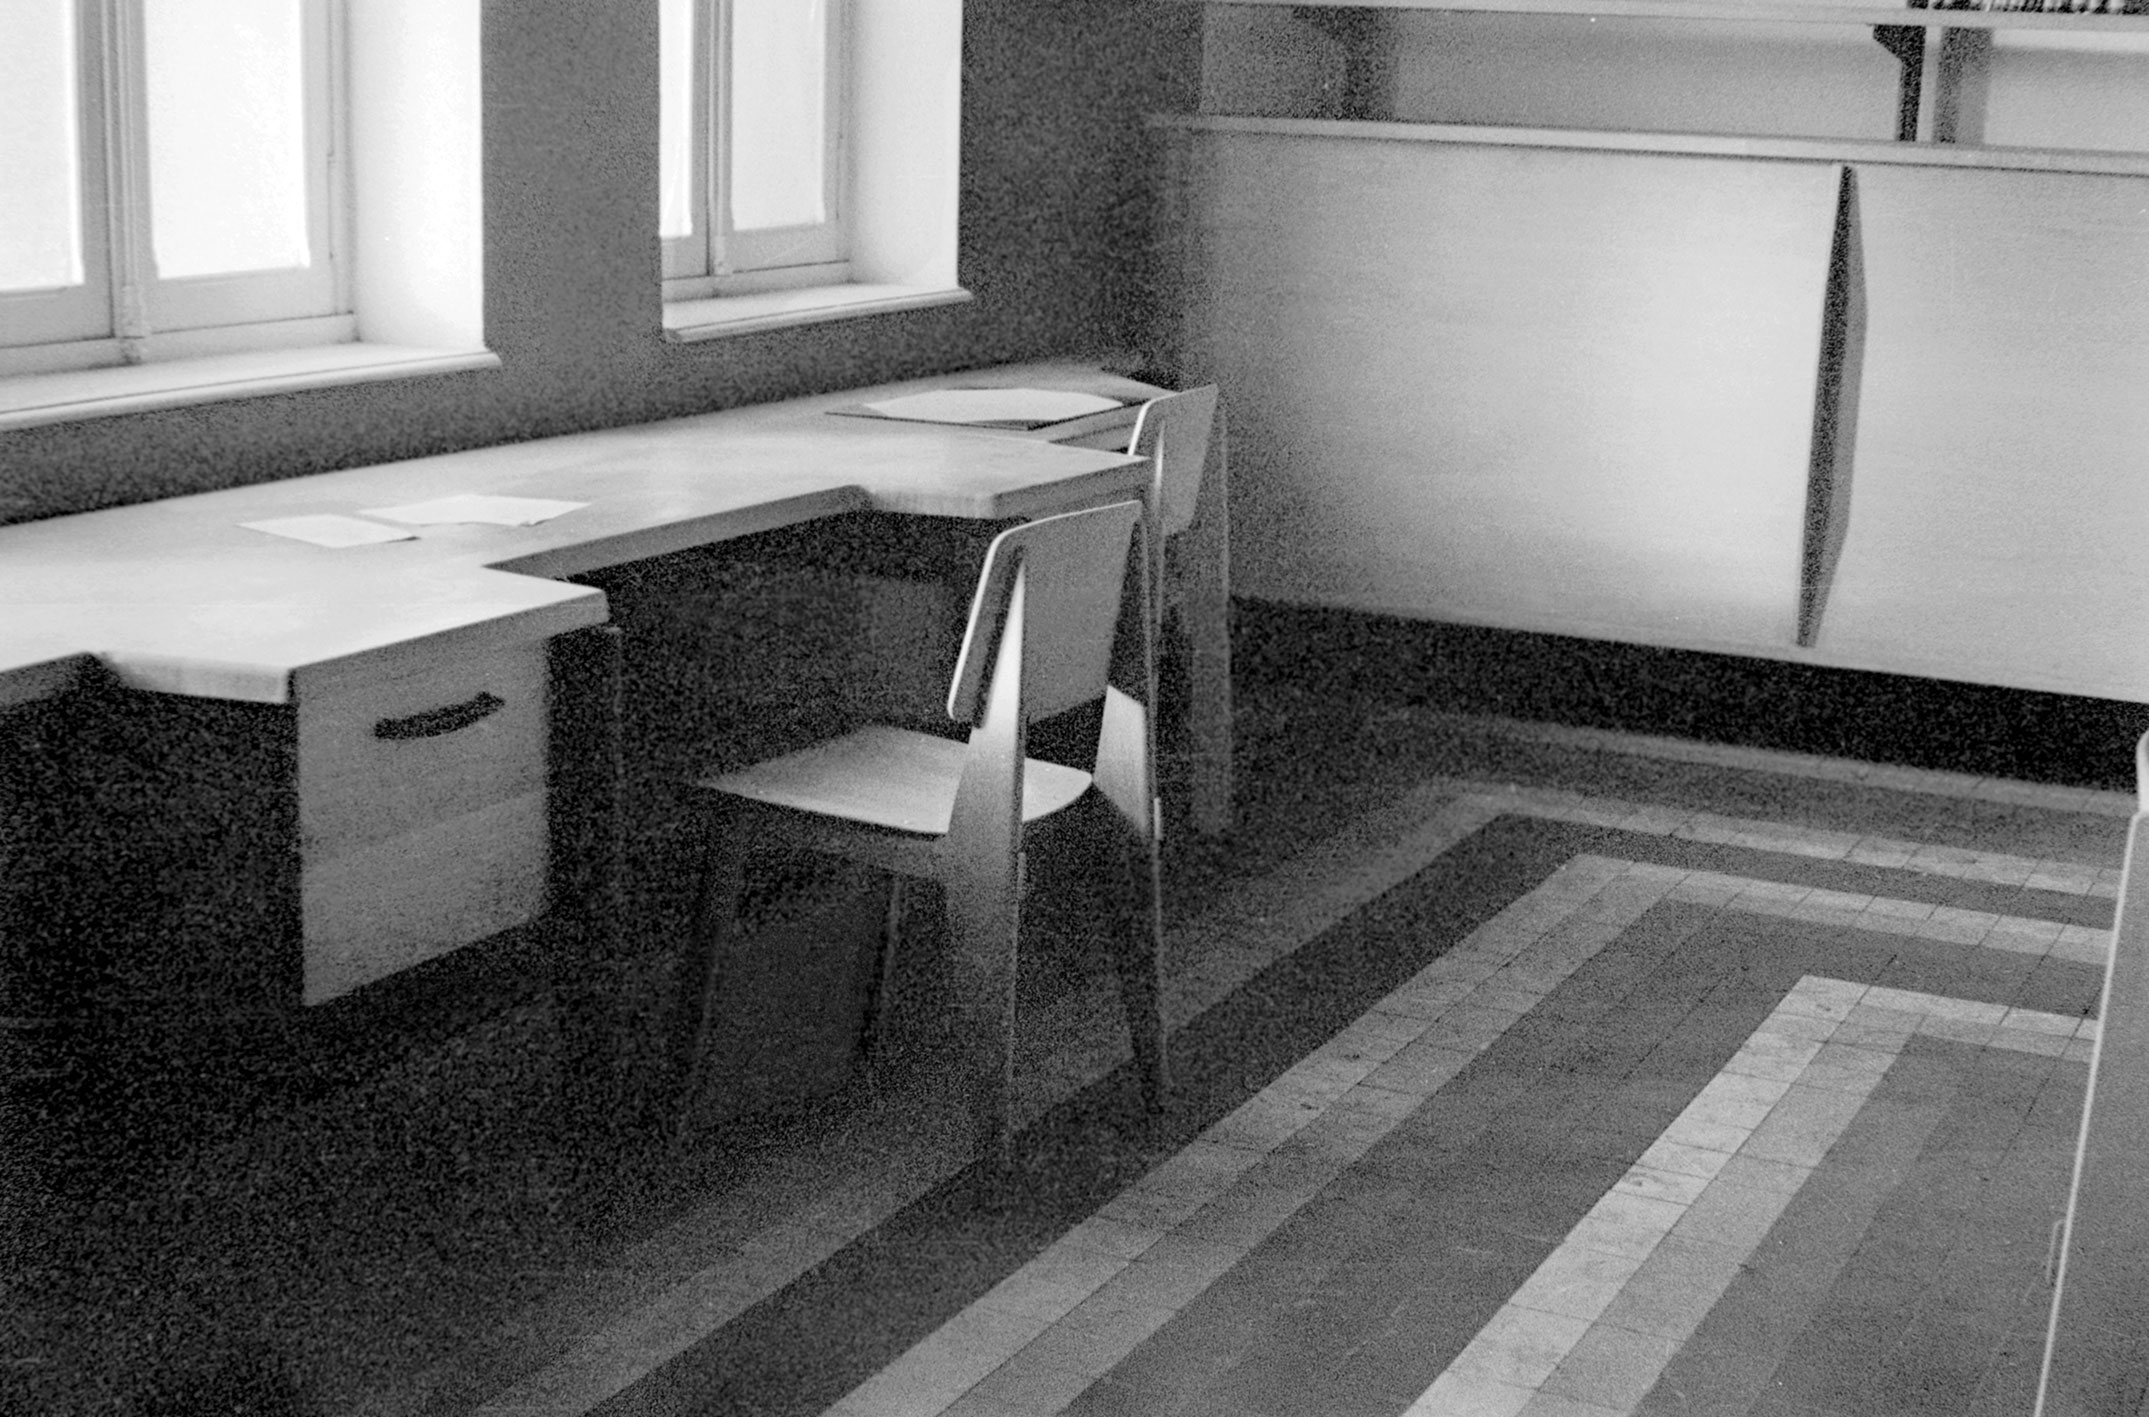 Staff center at the Berger-Levrault printing works, Nancy, c. 1942. Detail of a work table—a special model with drawer and a Tout Bois chair.